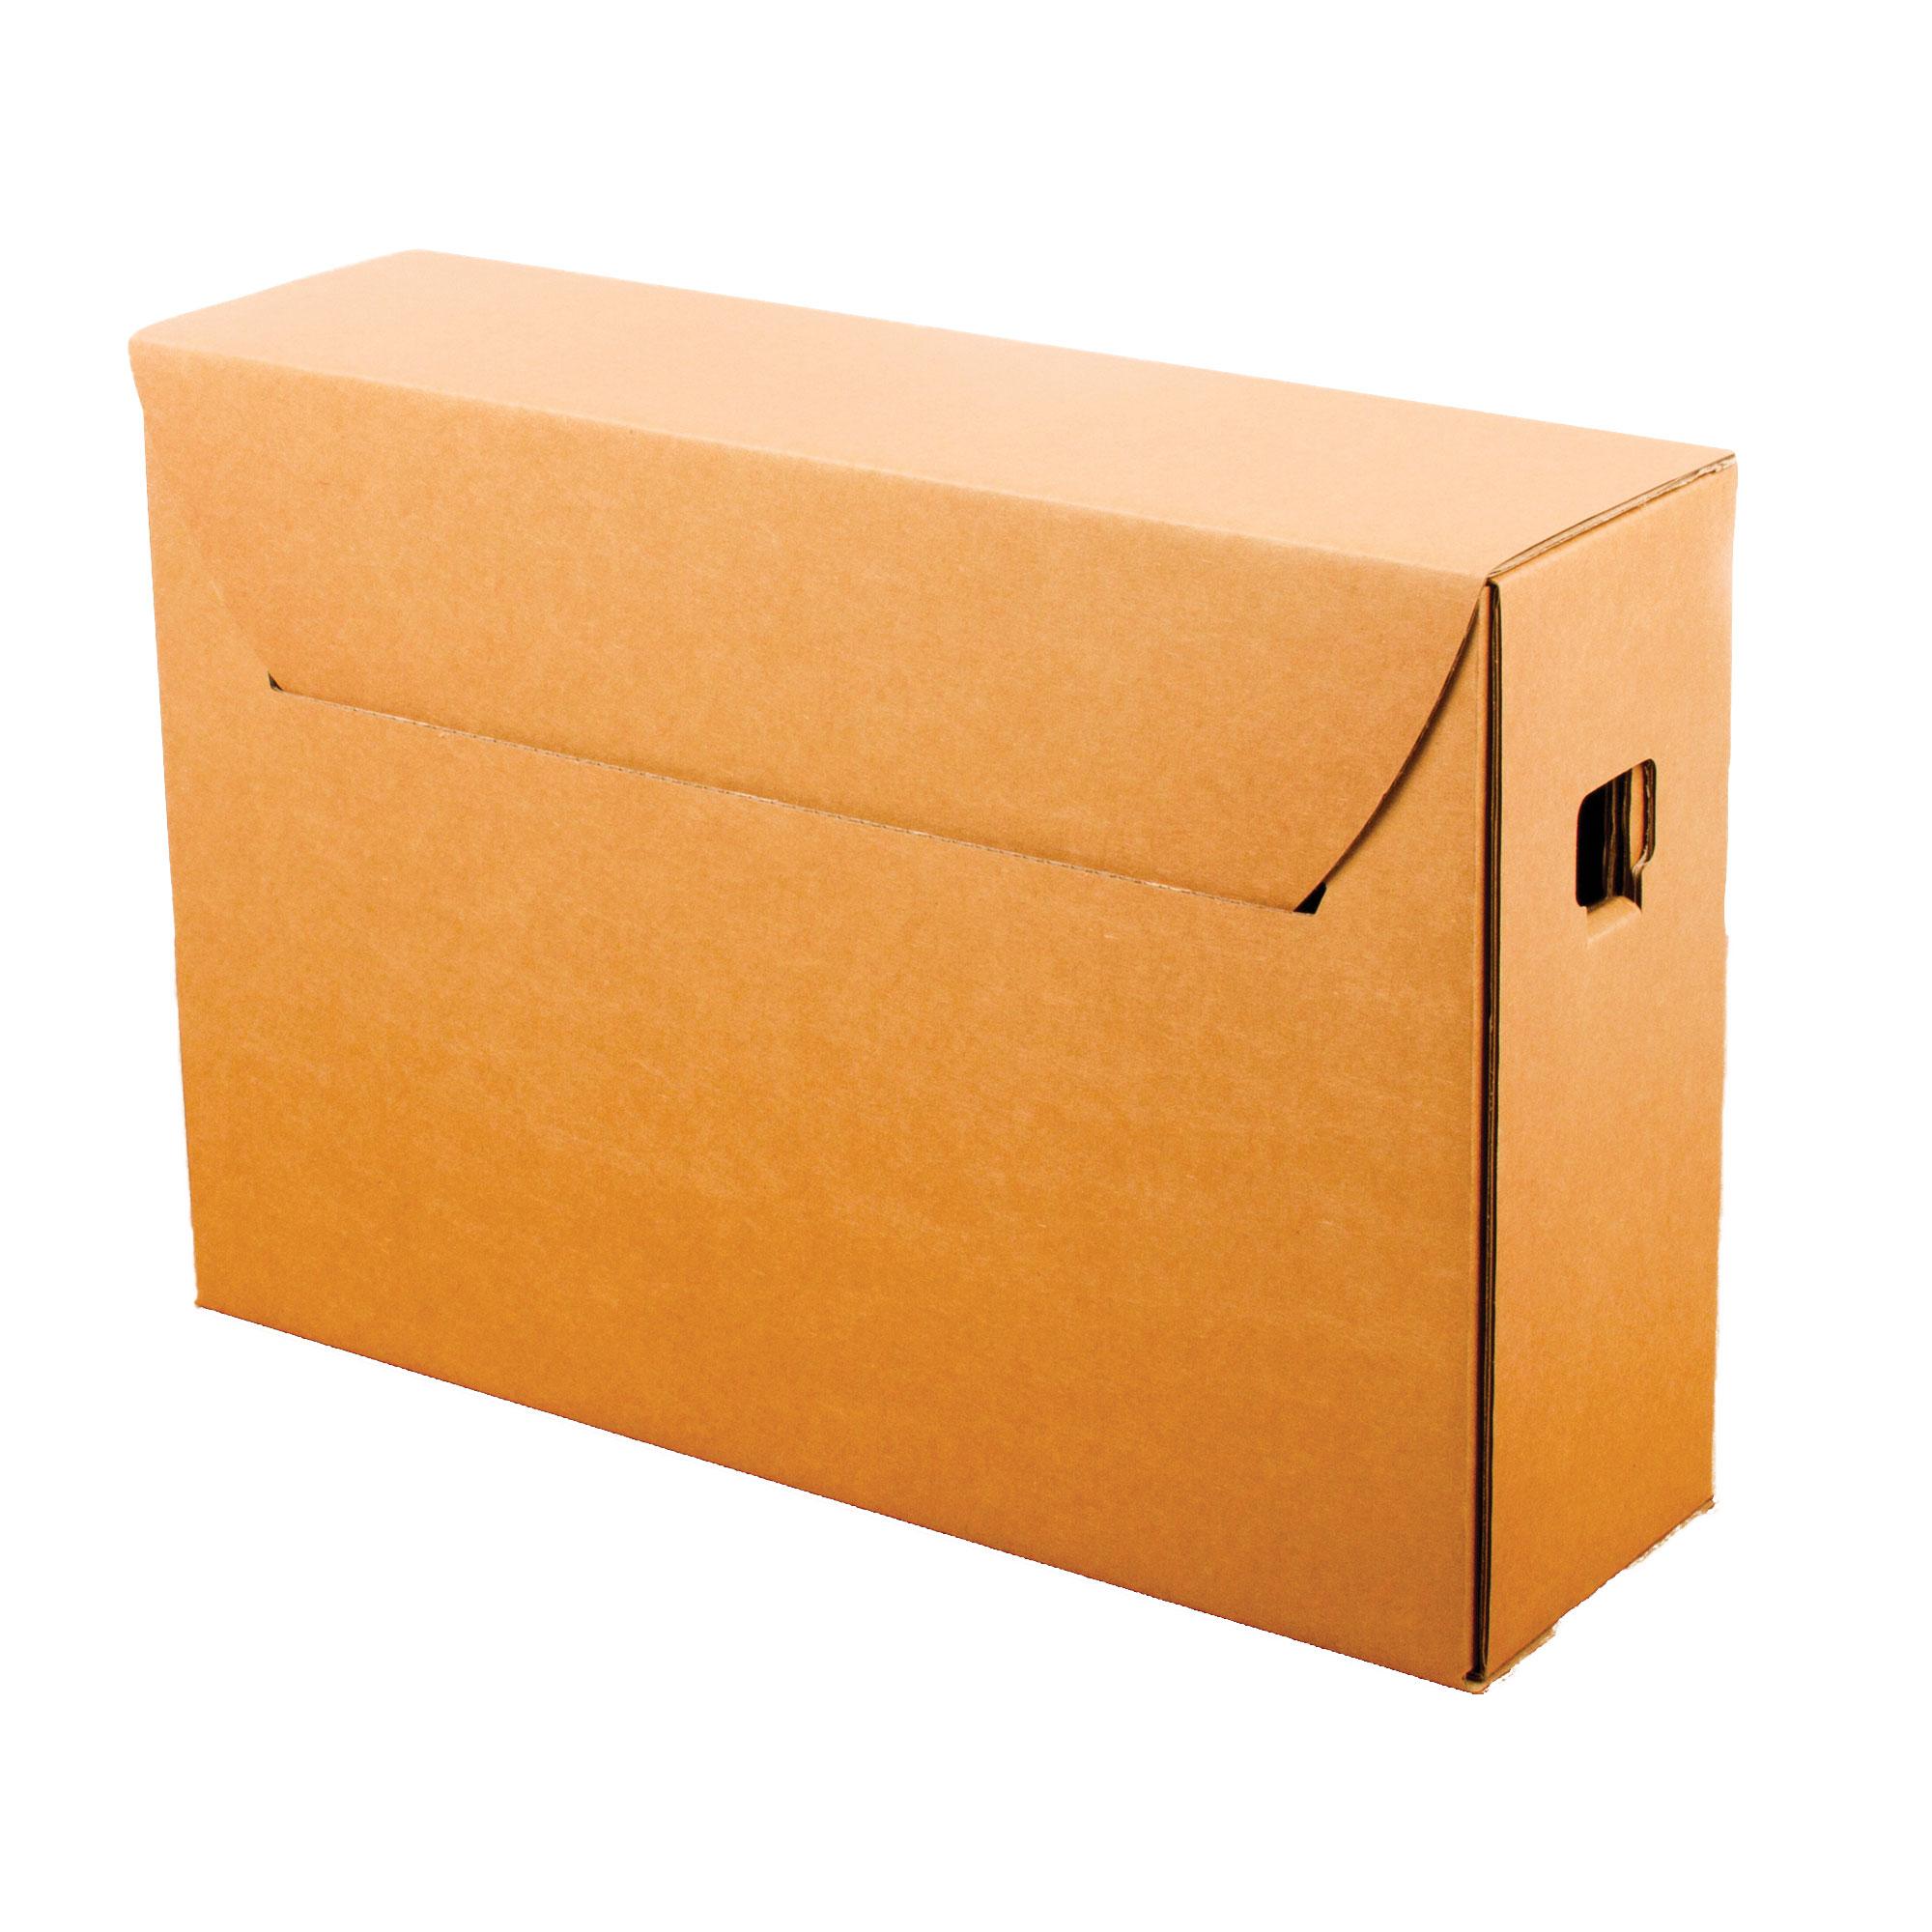 Corrugated Archival Storage Boxes - Pack of 1, 435x320x60mm